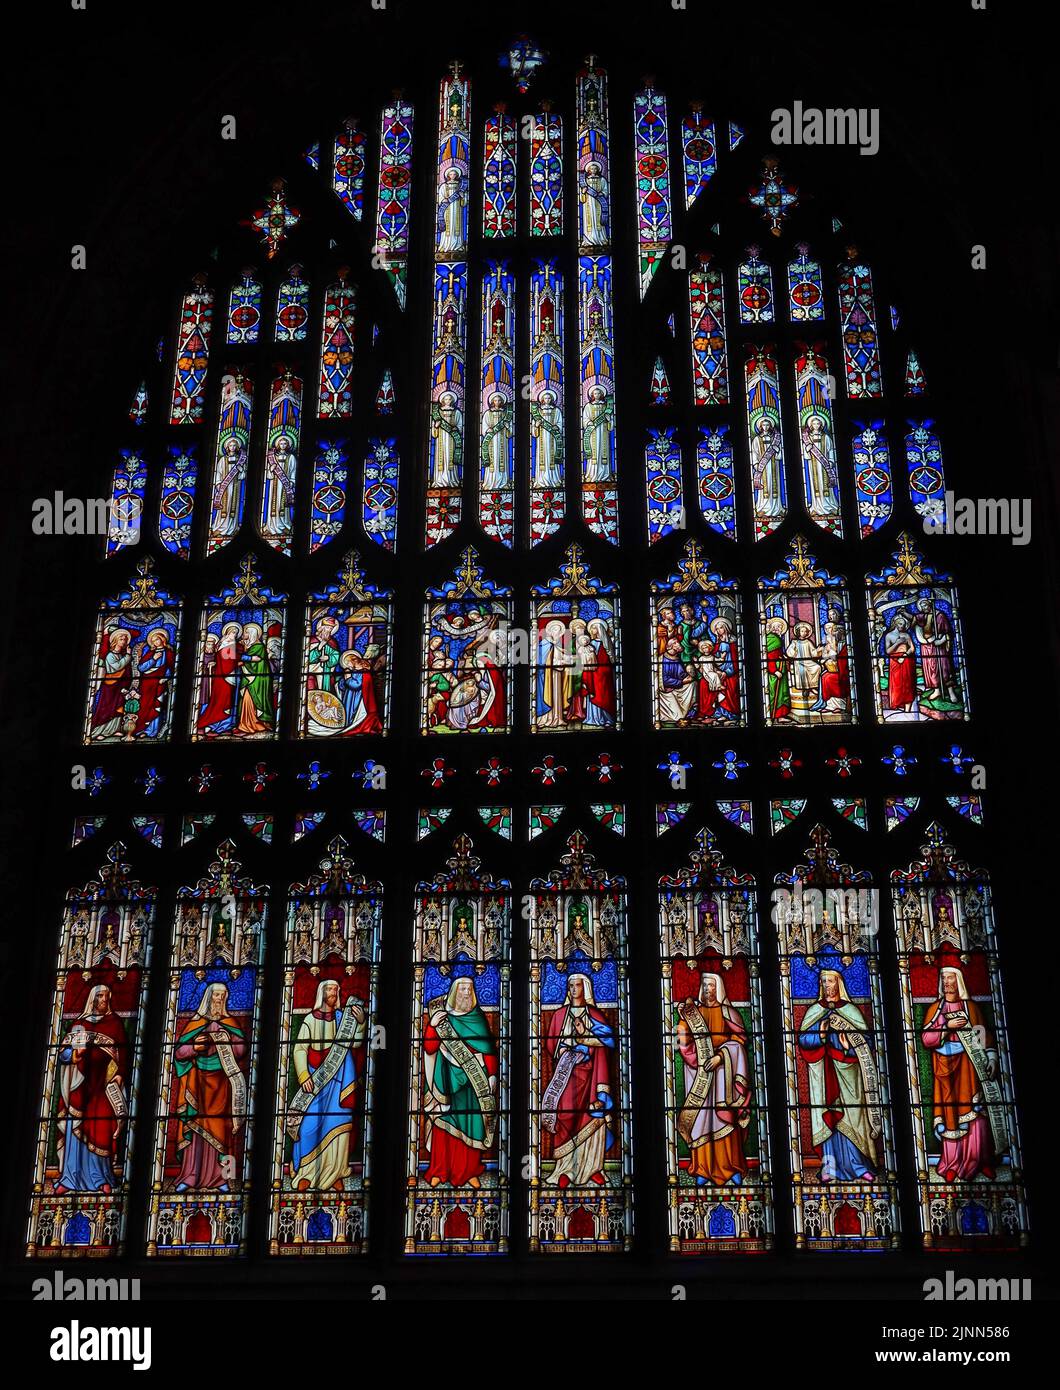 Stained glass window in St Mary's Church, Church Lane, Nantwich, Cheshire, England, UK,  CW5 5RQ Stock Photo